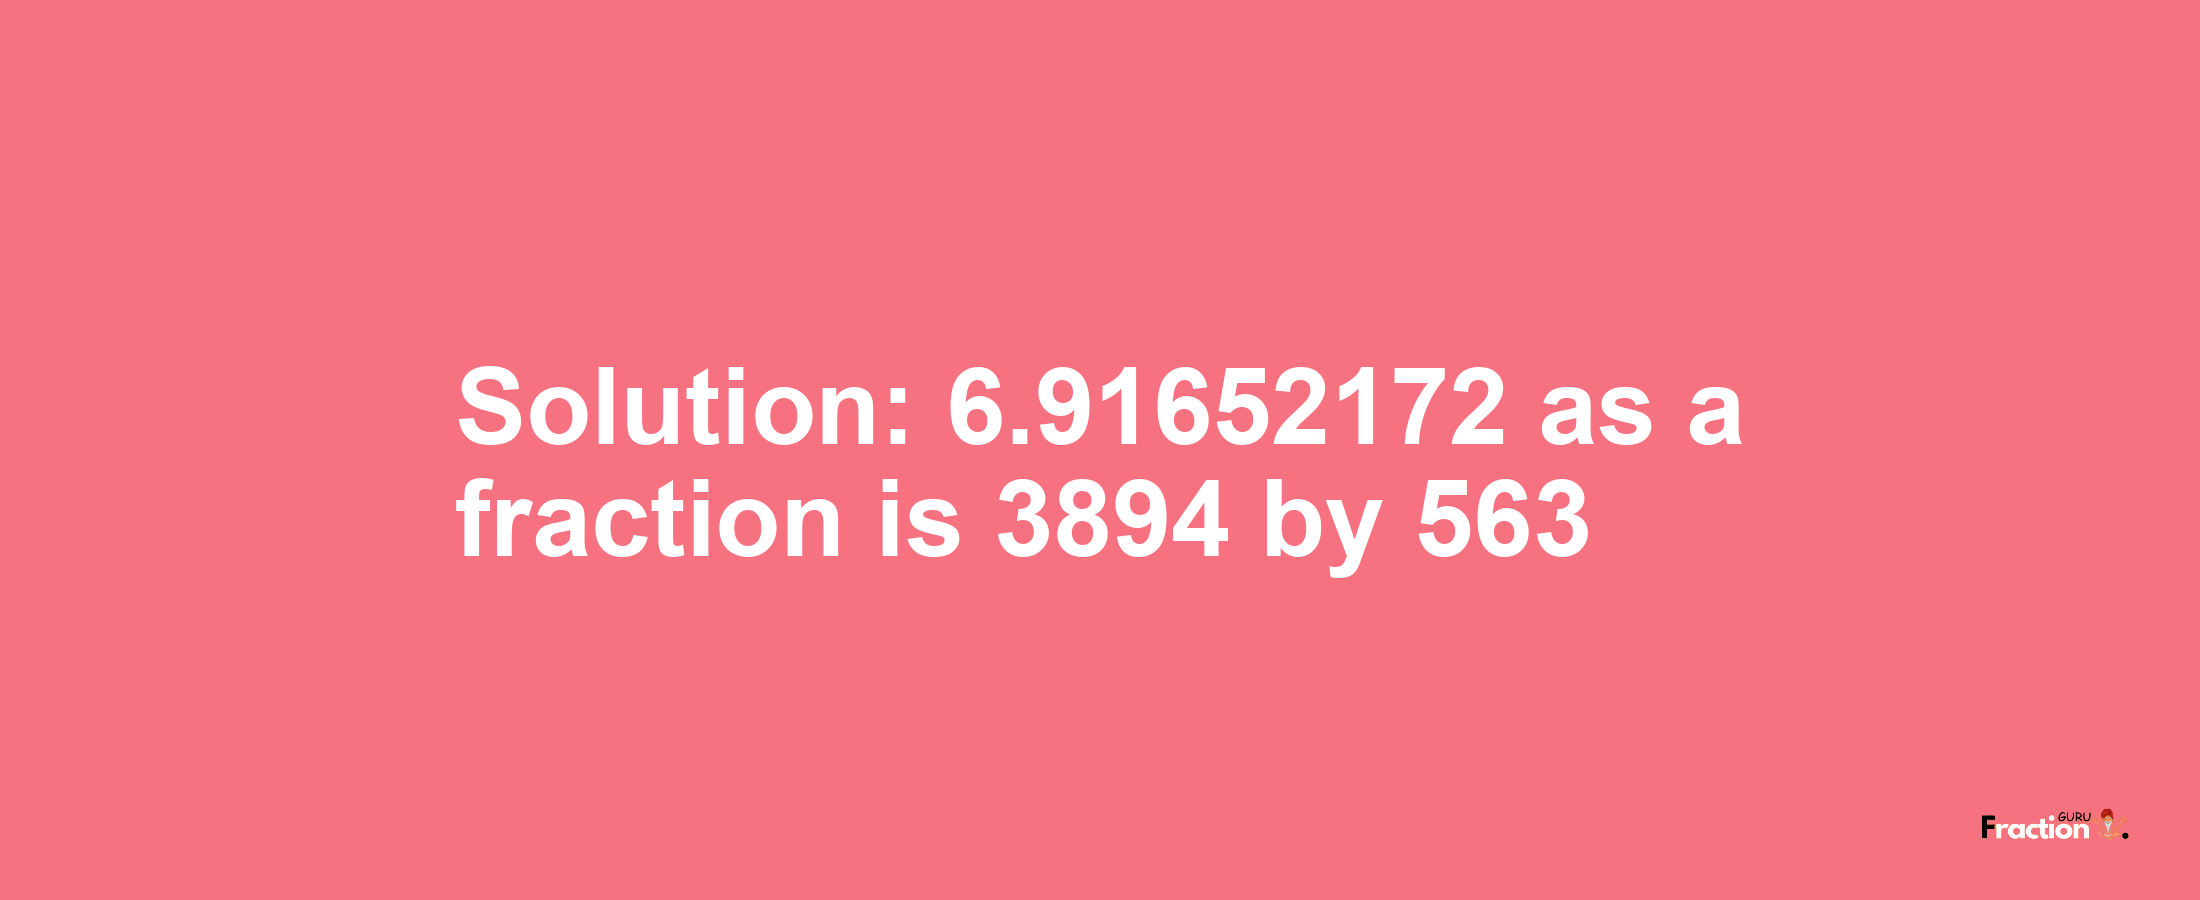 Solution:6.91652172 as a fraction is 3894/563